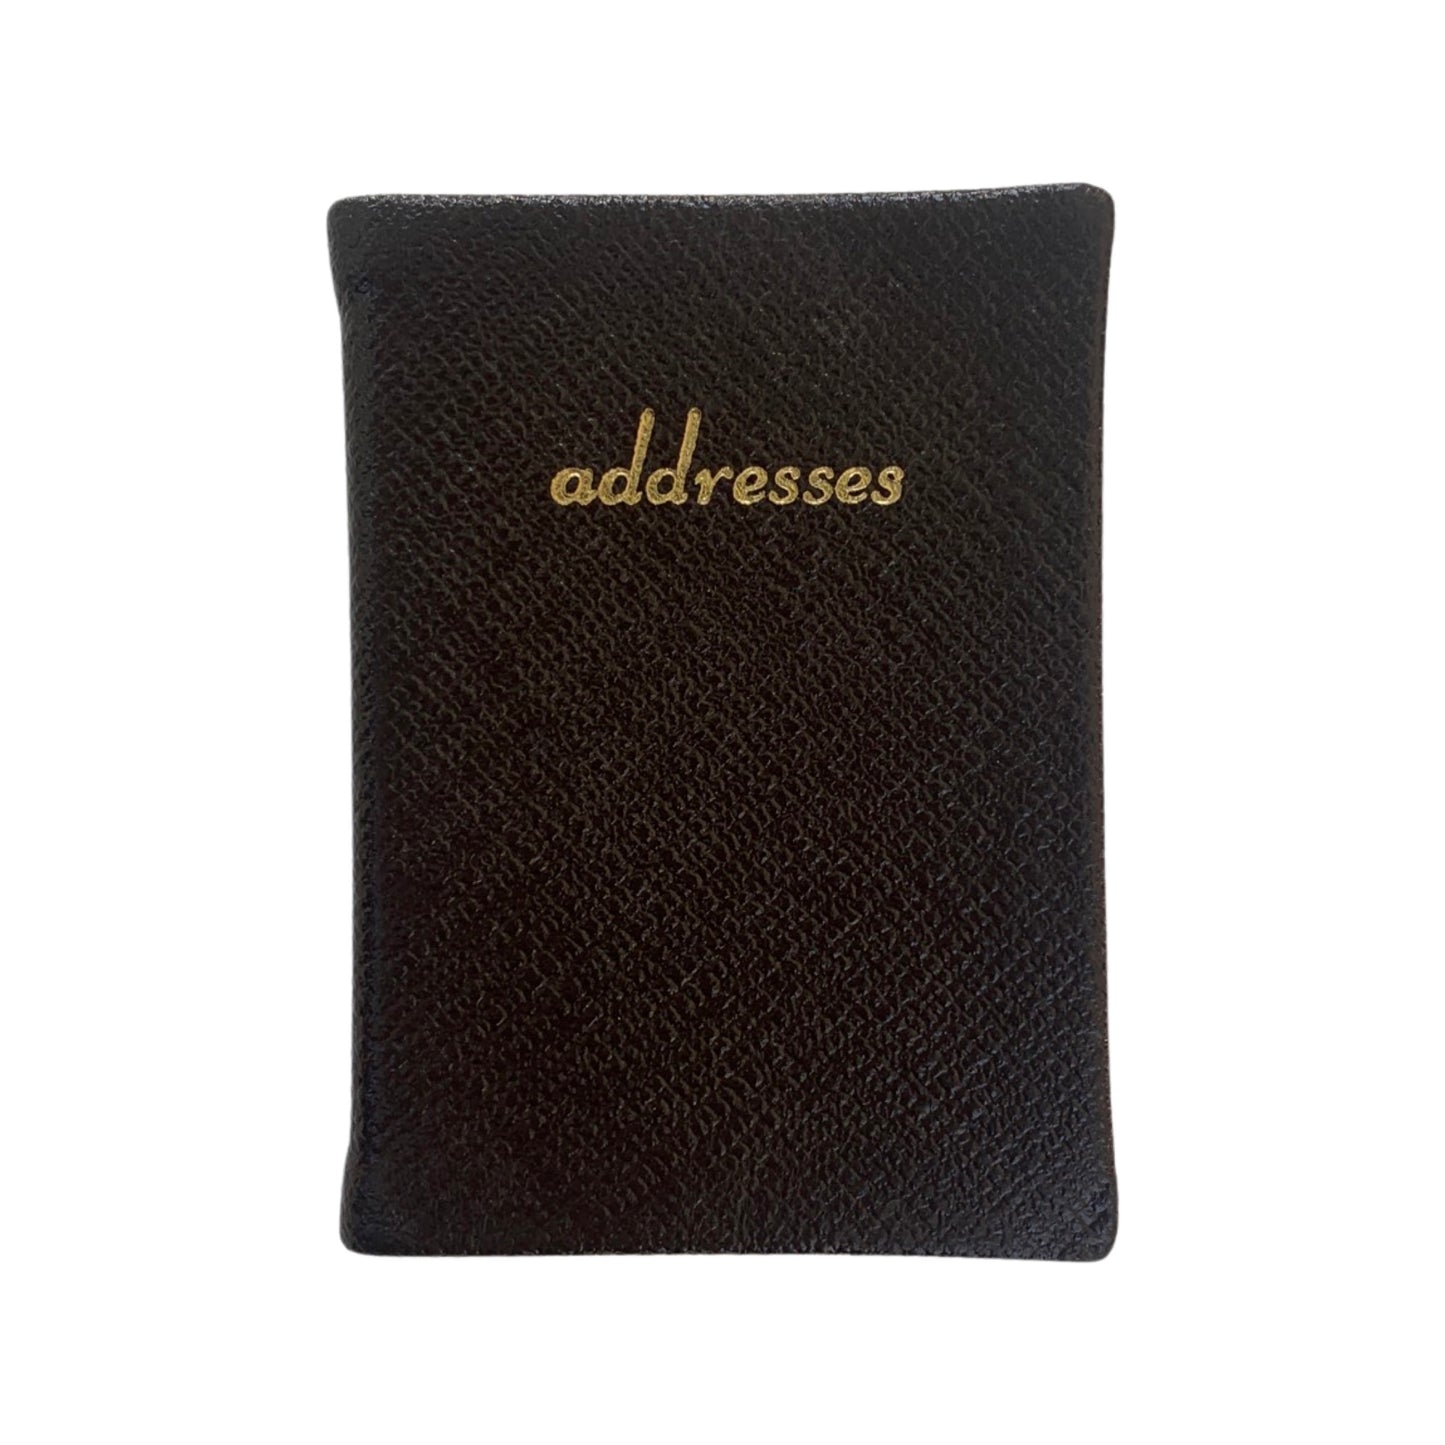 Address Book |  3 by 2.5 inch size | Crossgrain Leather | Charing Cross | A32L